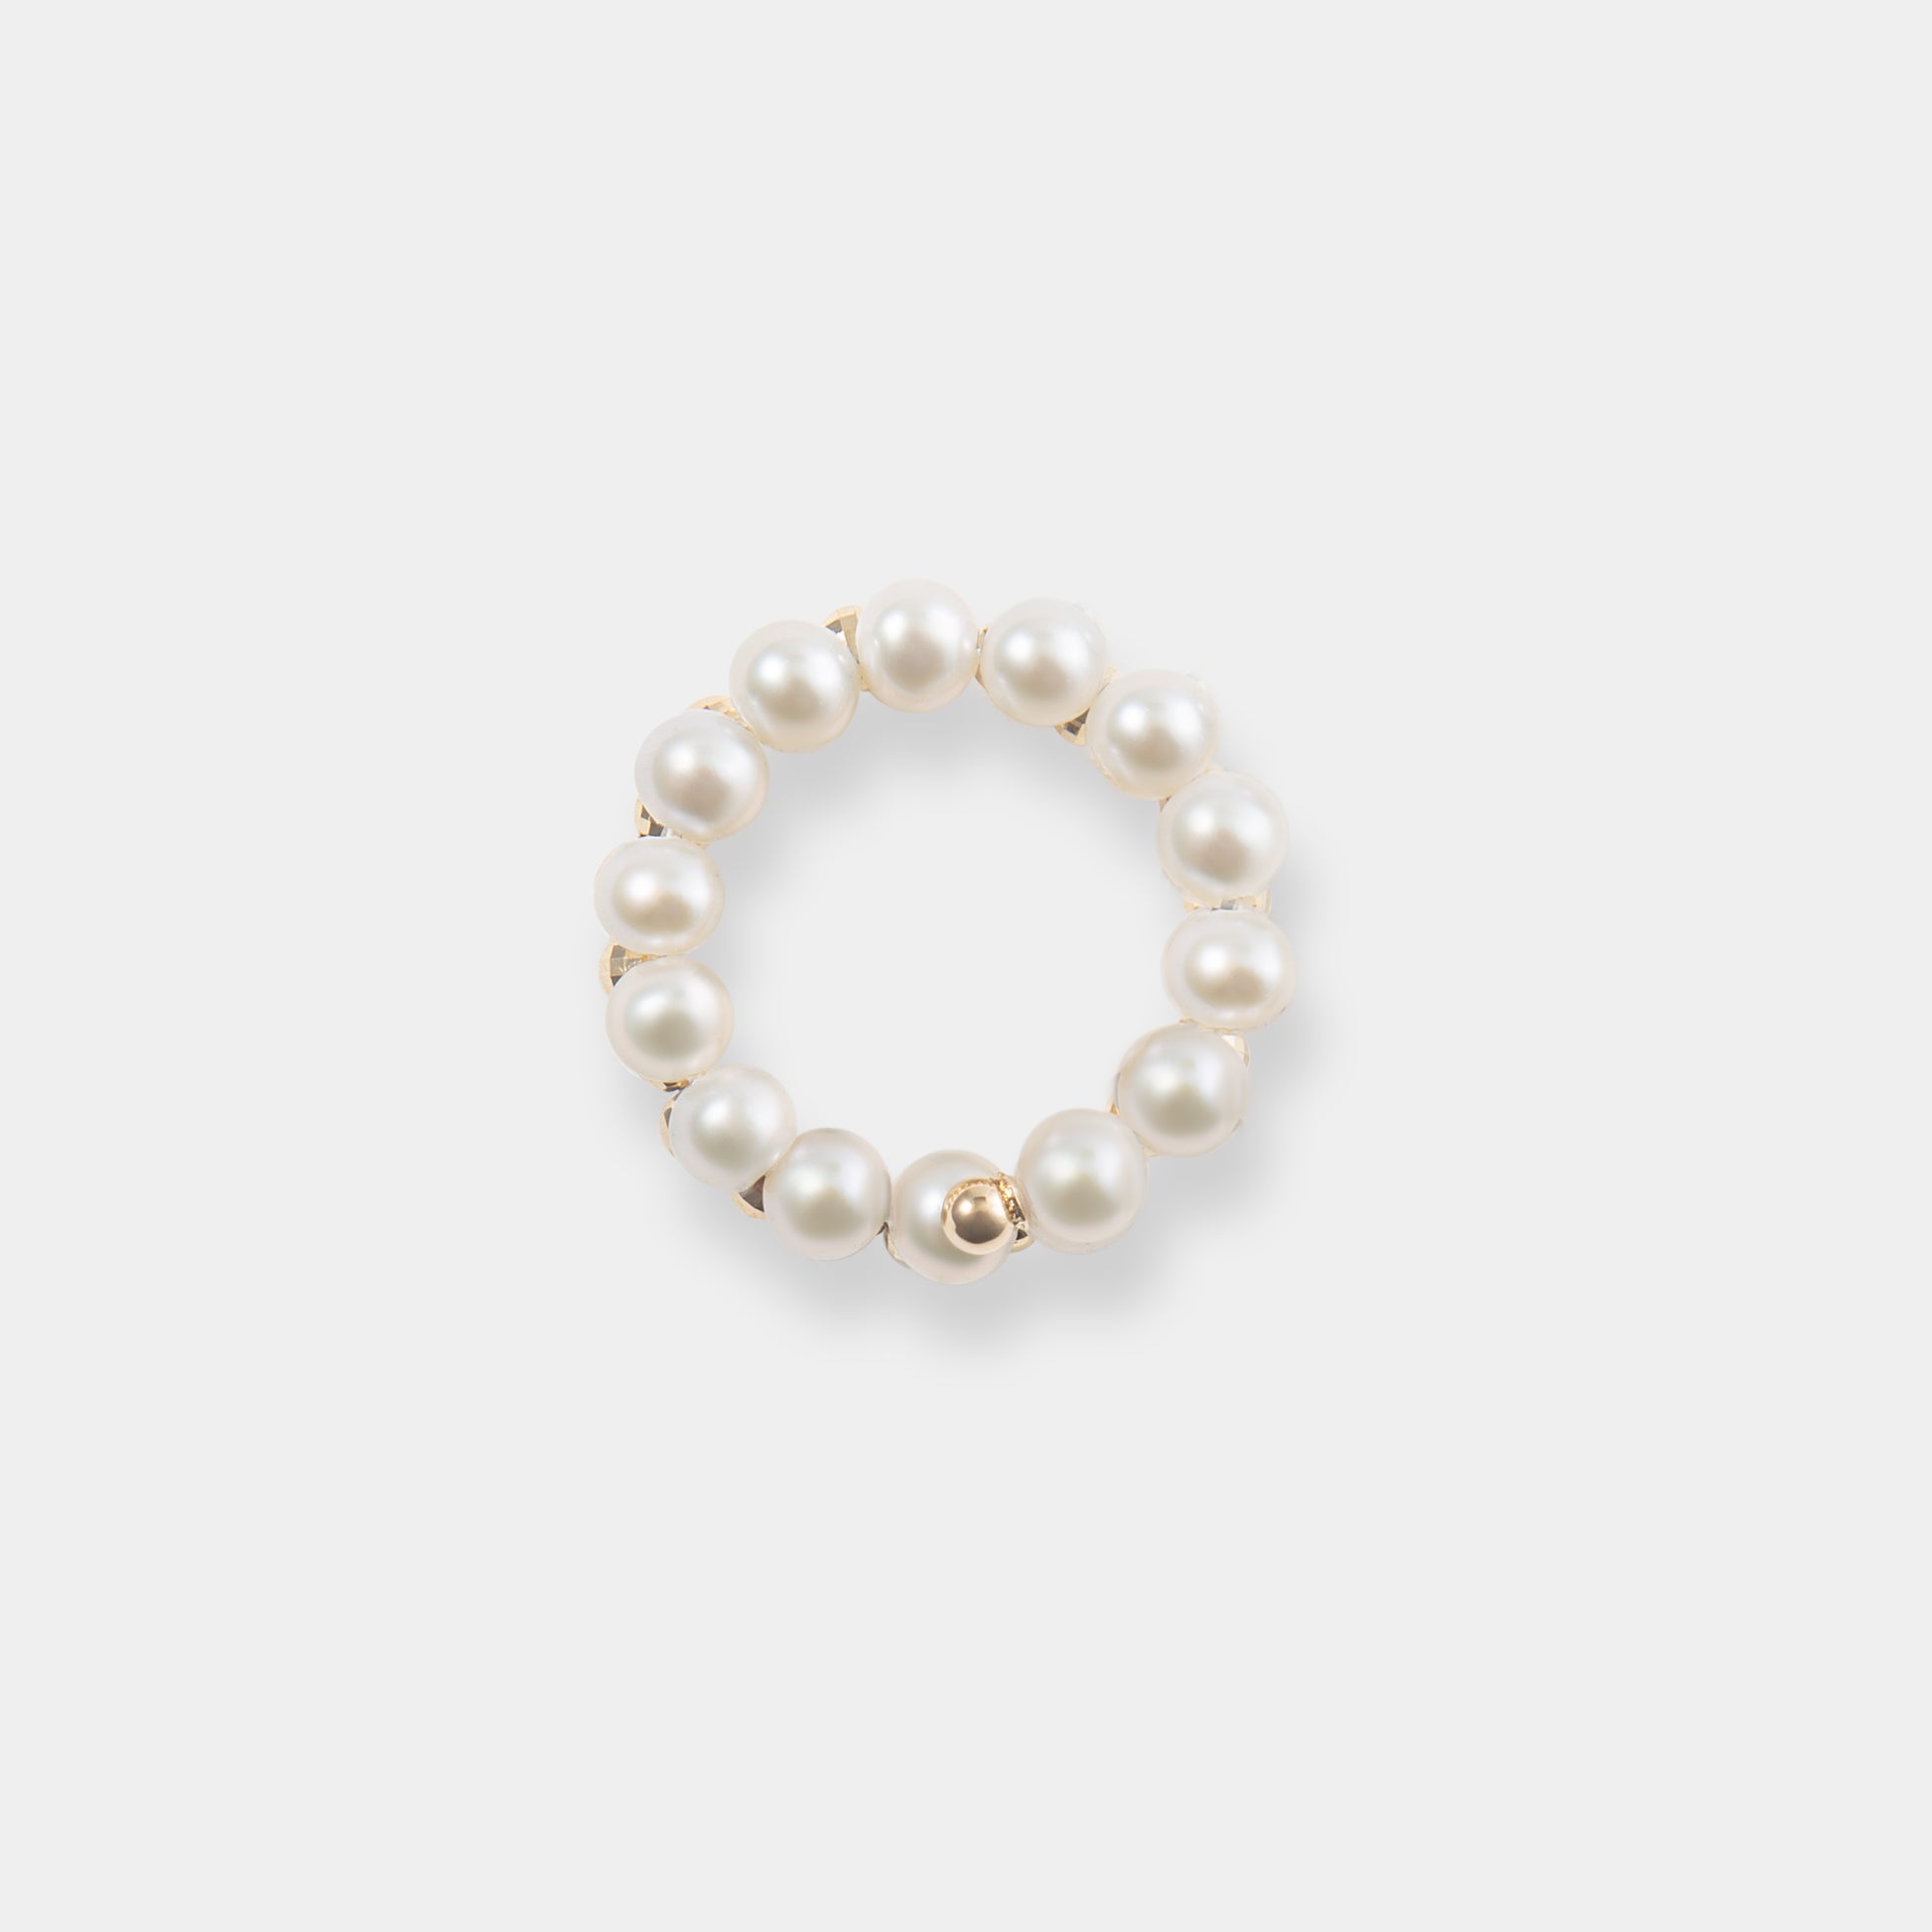 Add a touch of glamour with this exquisite gold and white pearl ring featuring a unique spiral design.